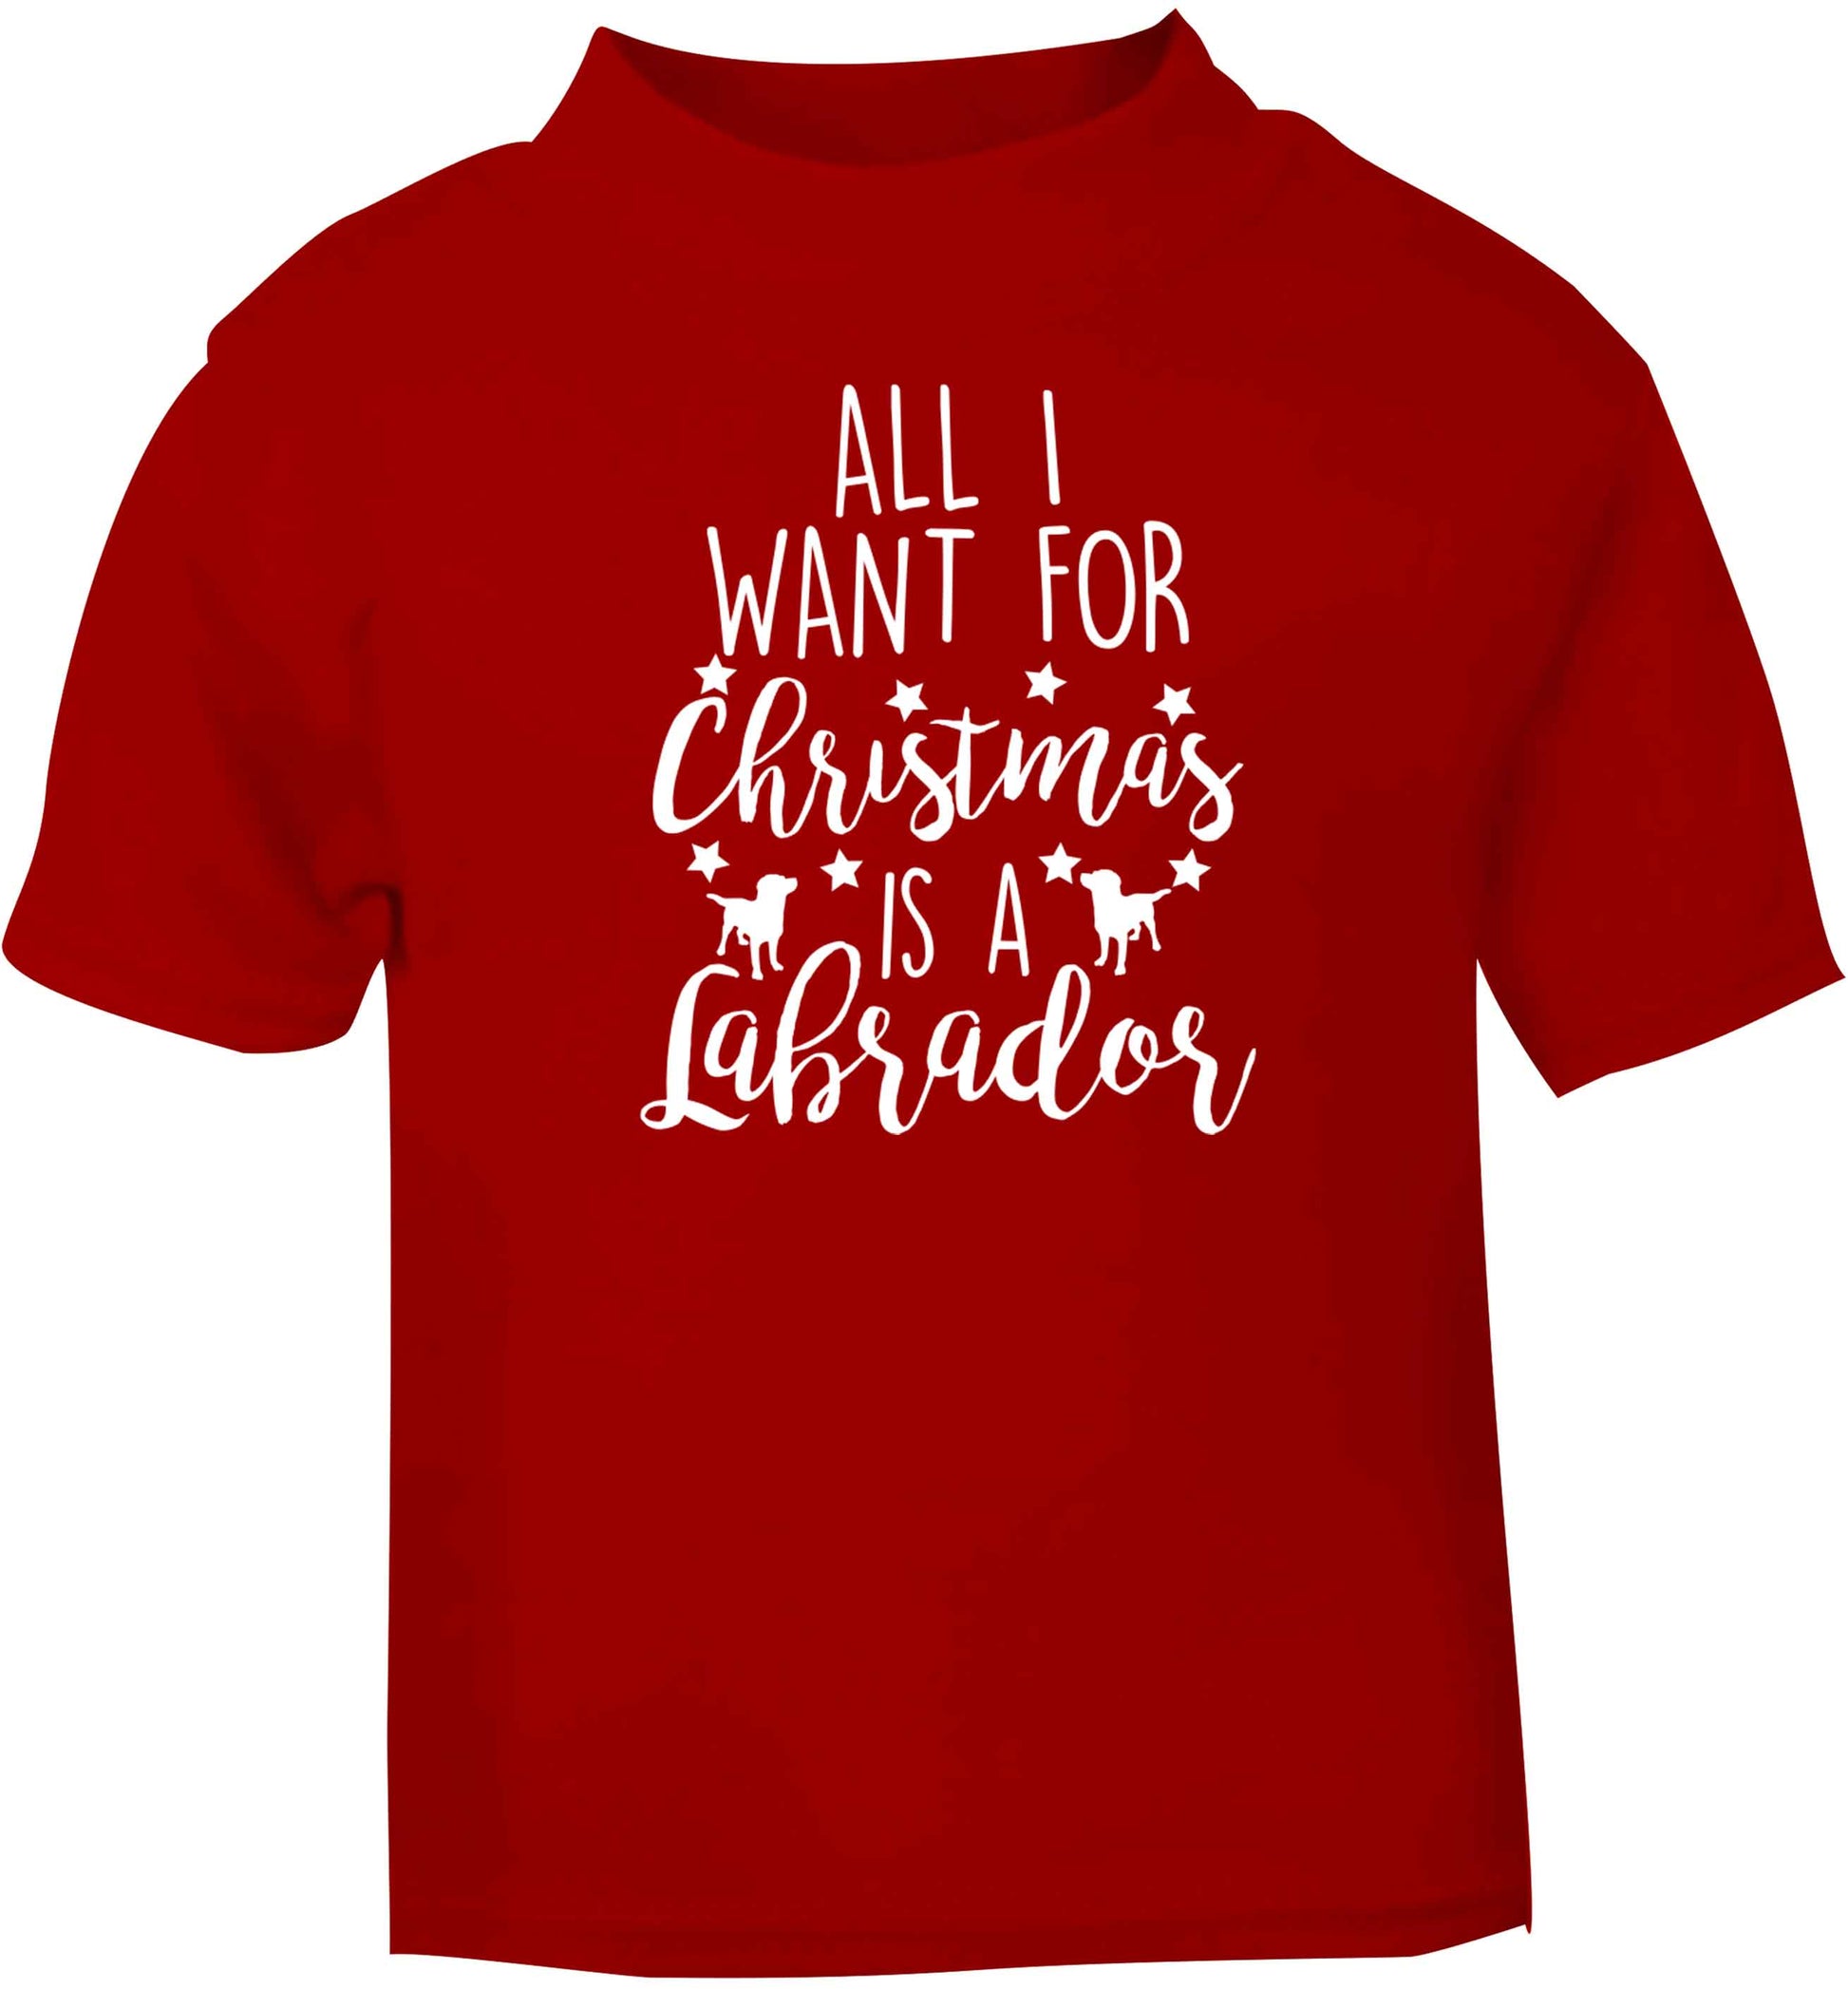 All I want for Christmas is a labrador red baby toddler Tshirt 2 Years